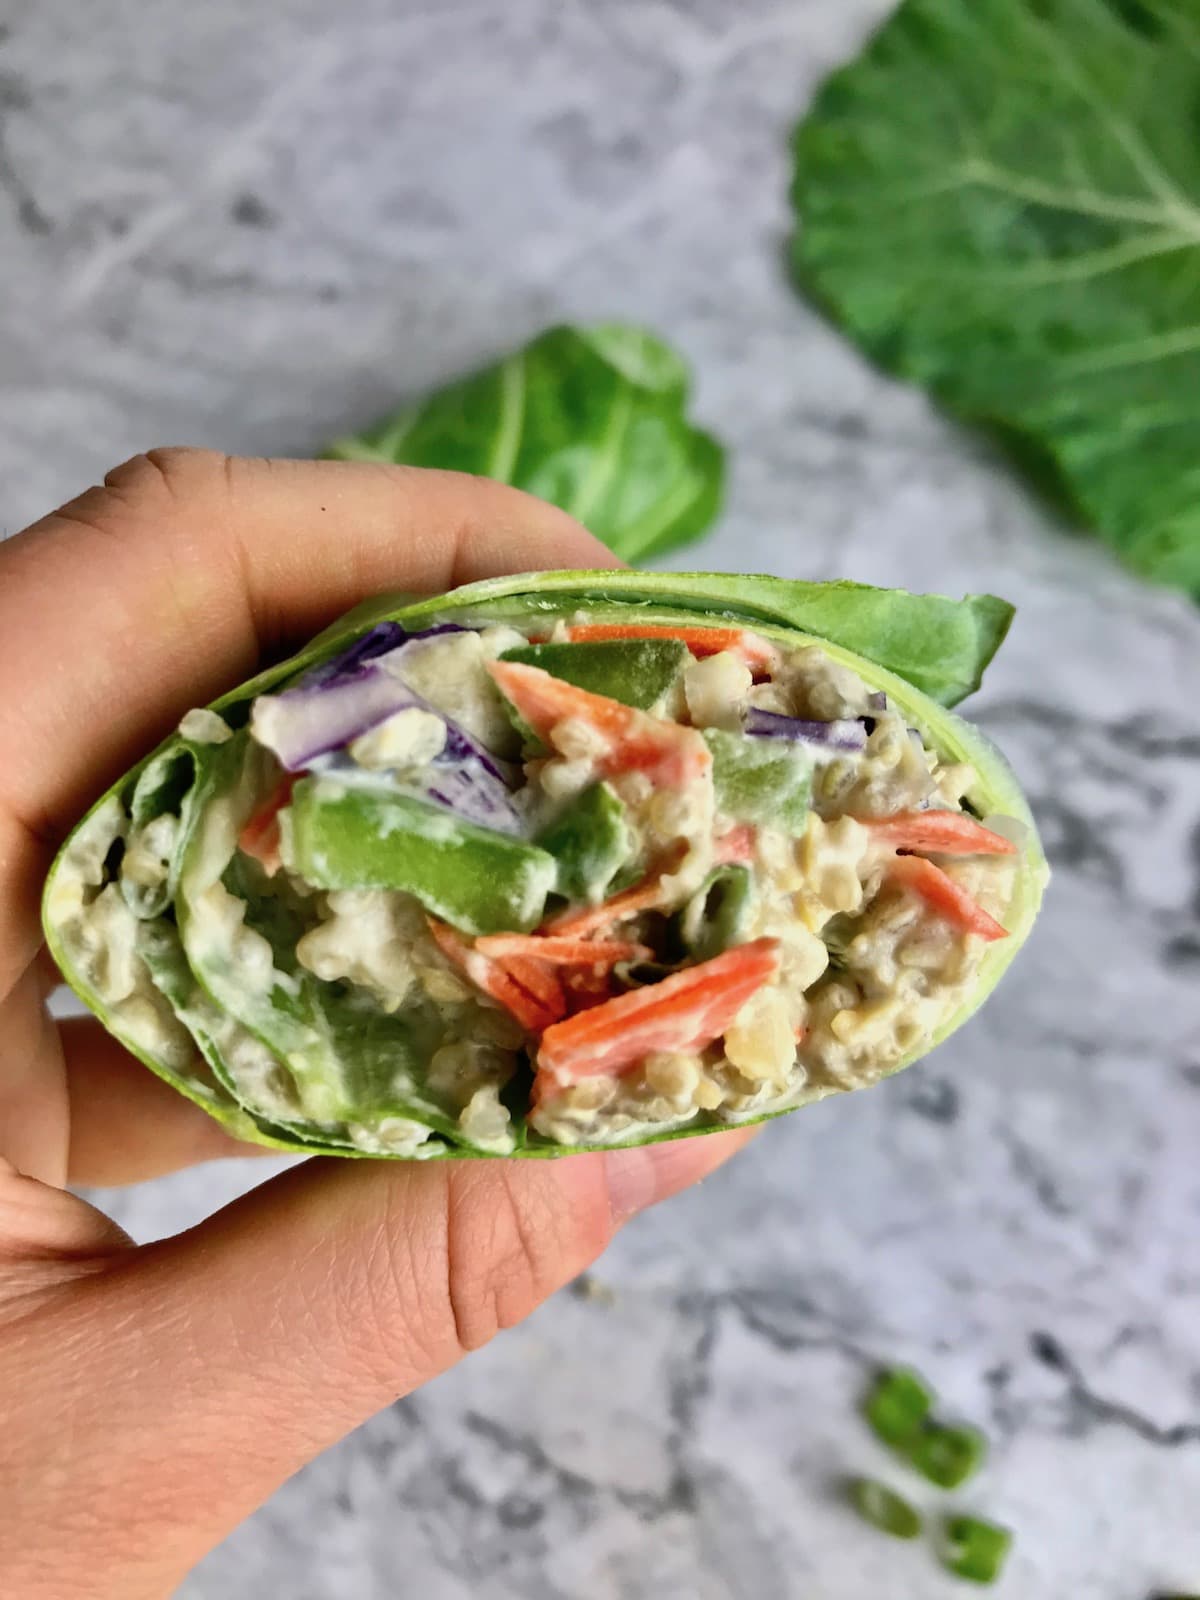 A hand holding a collard green wrap filled with a creamy dressing and vegetables.